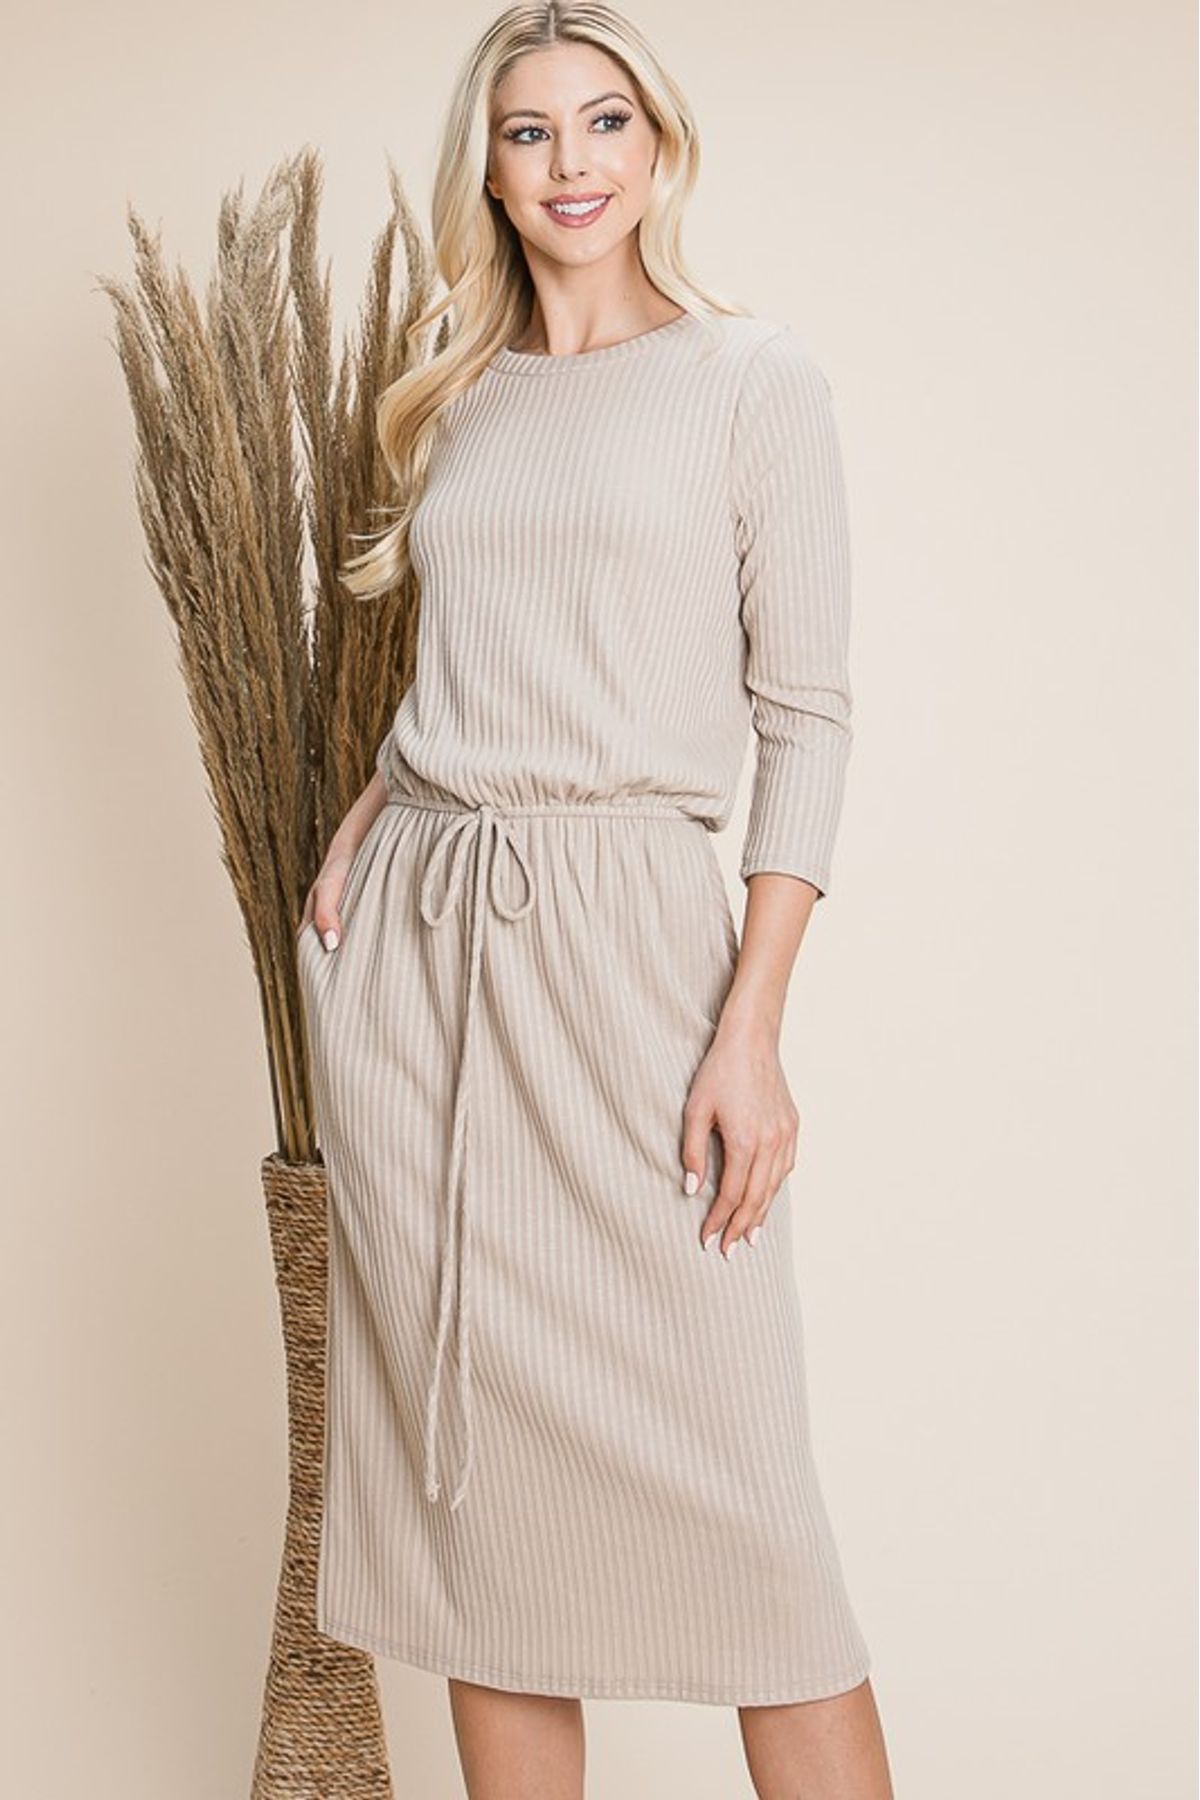 Rowen Ribbed Midi Dress in Taupe